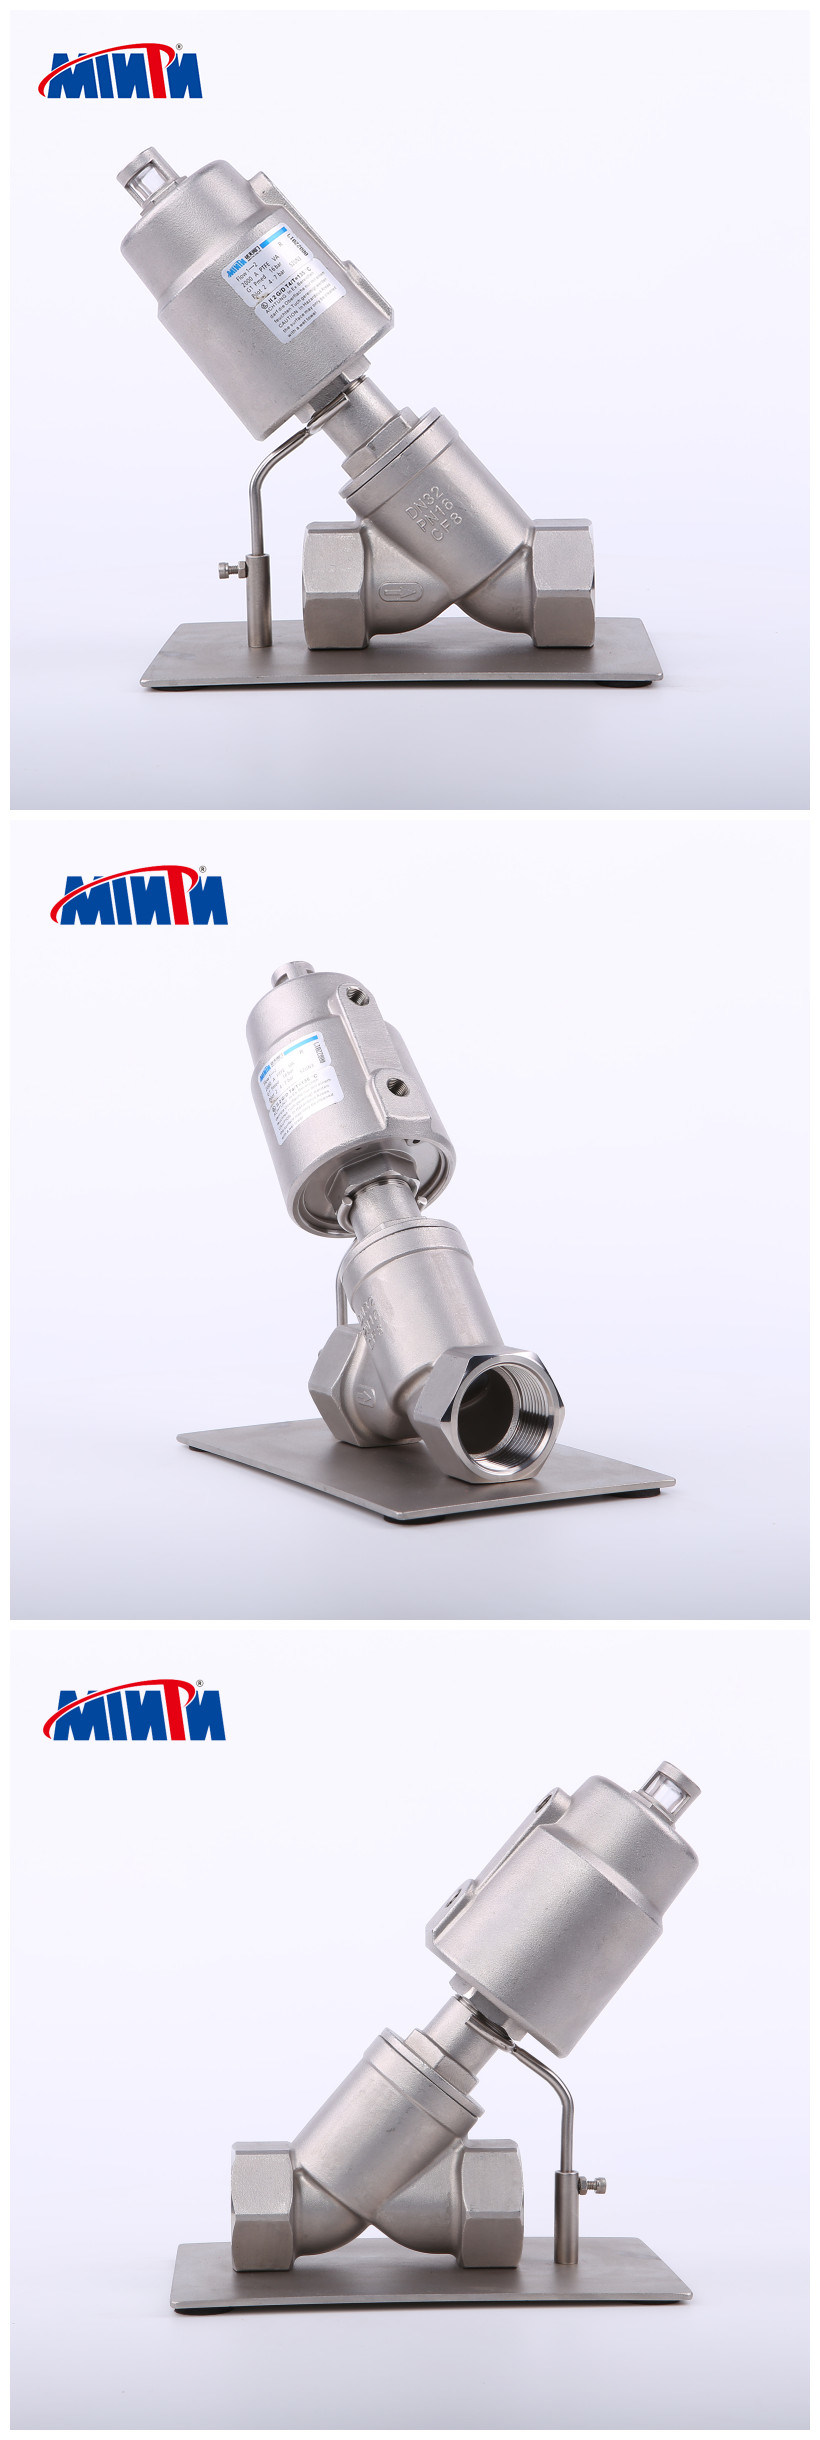 Mintn-Pneumatic Angle Seat Valve Thread Ends